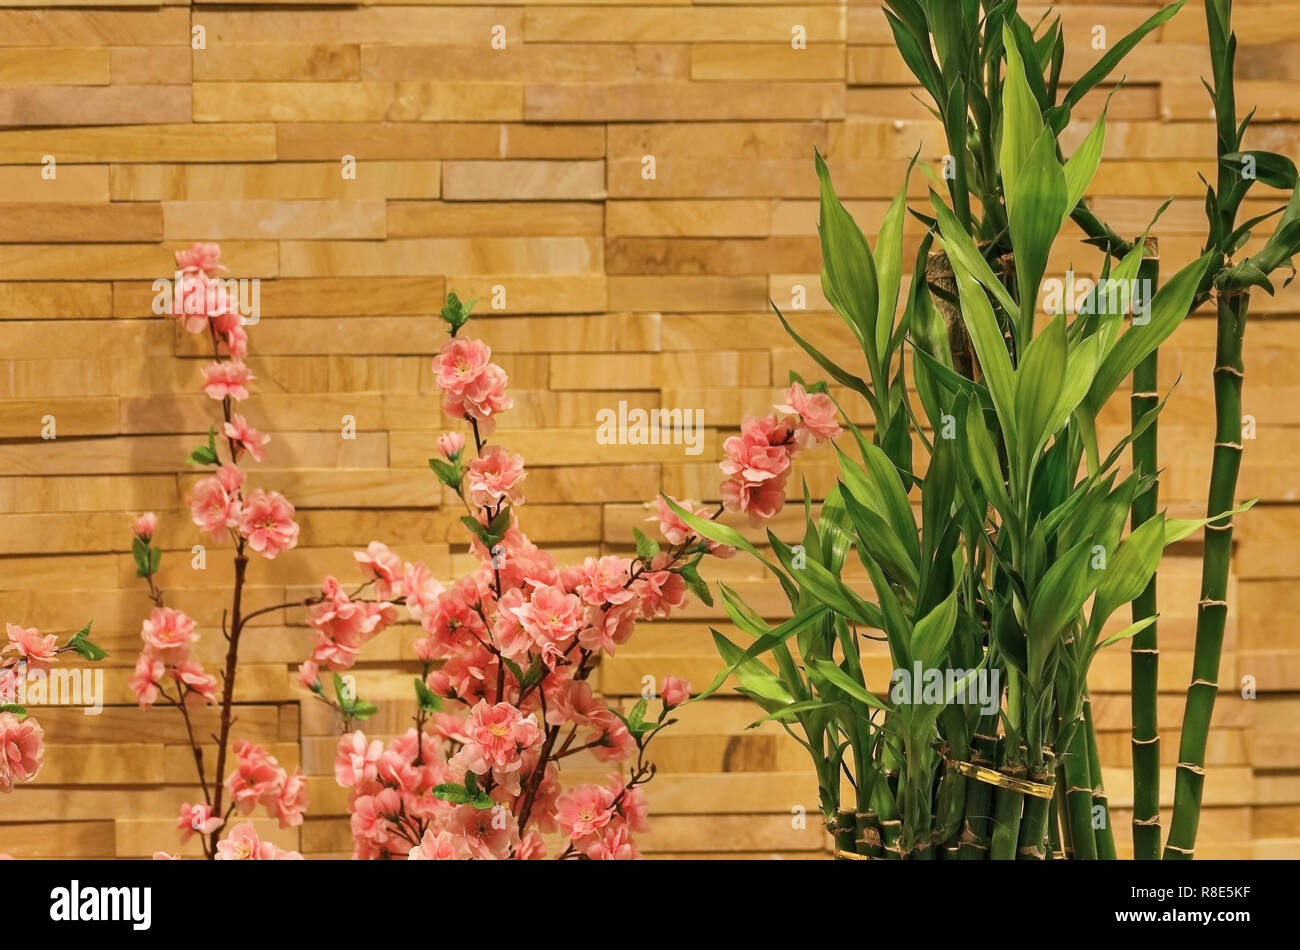 bamboo and pink flowers on brick wall background Stock Photo